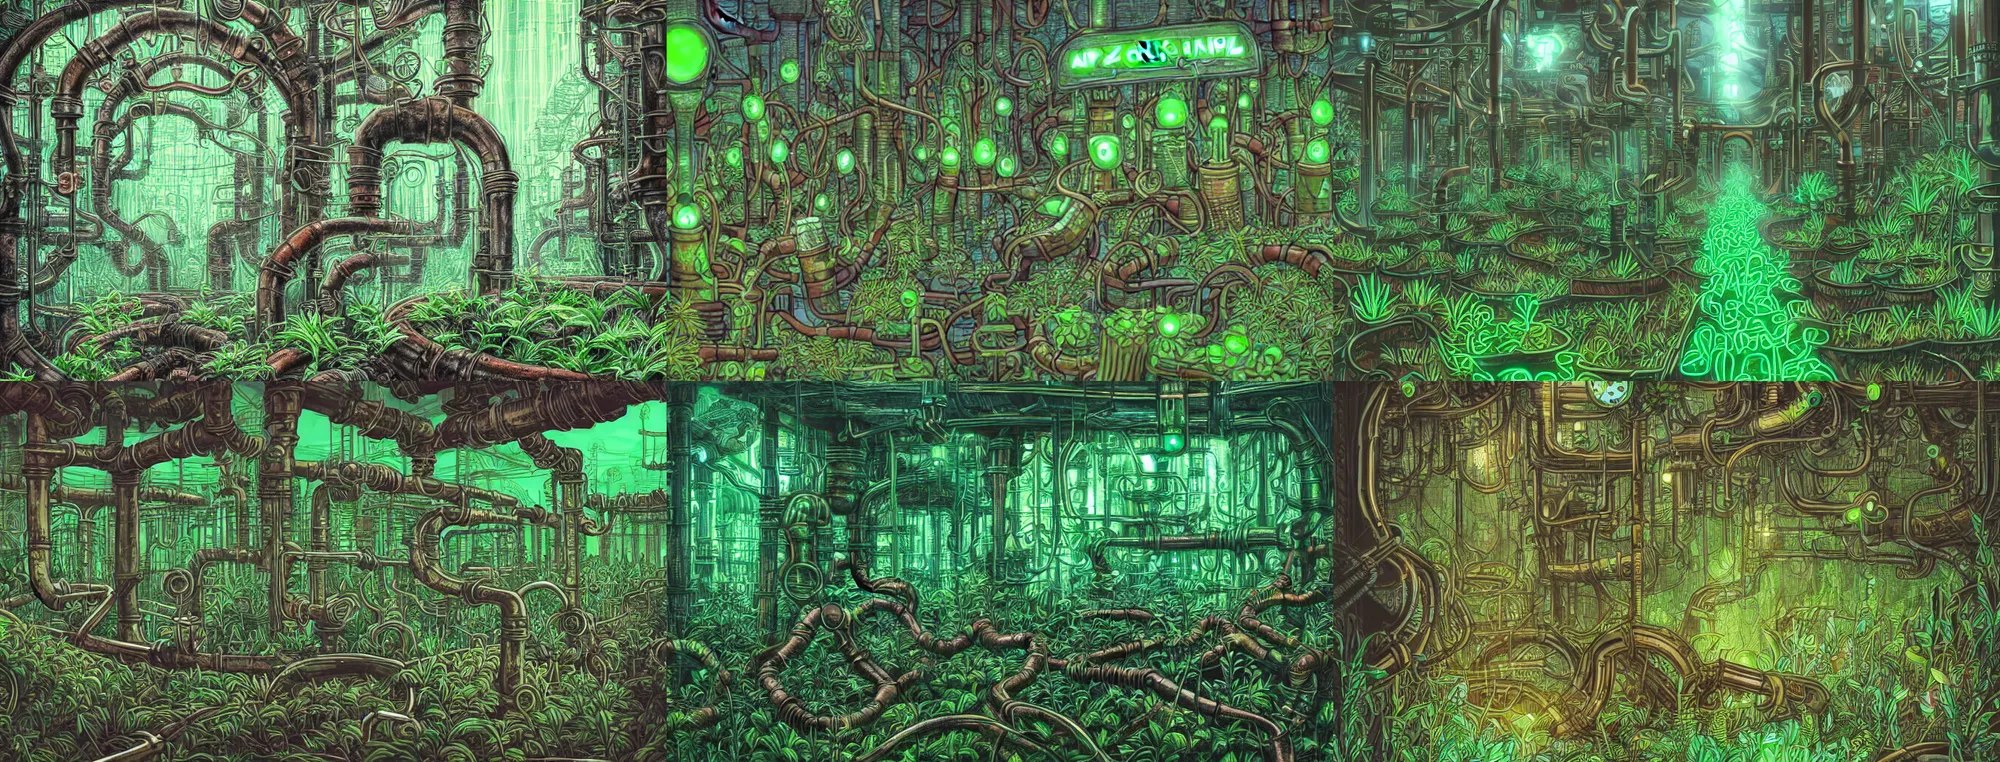 Prompt: plants growing out of old rusty pipes in an amazing maze, green neon lights, ground covered in mist, detailed steampunk illustration